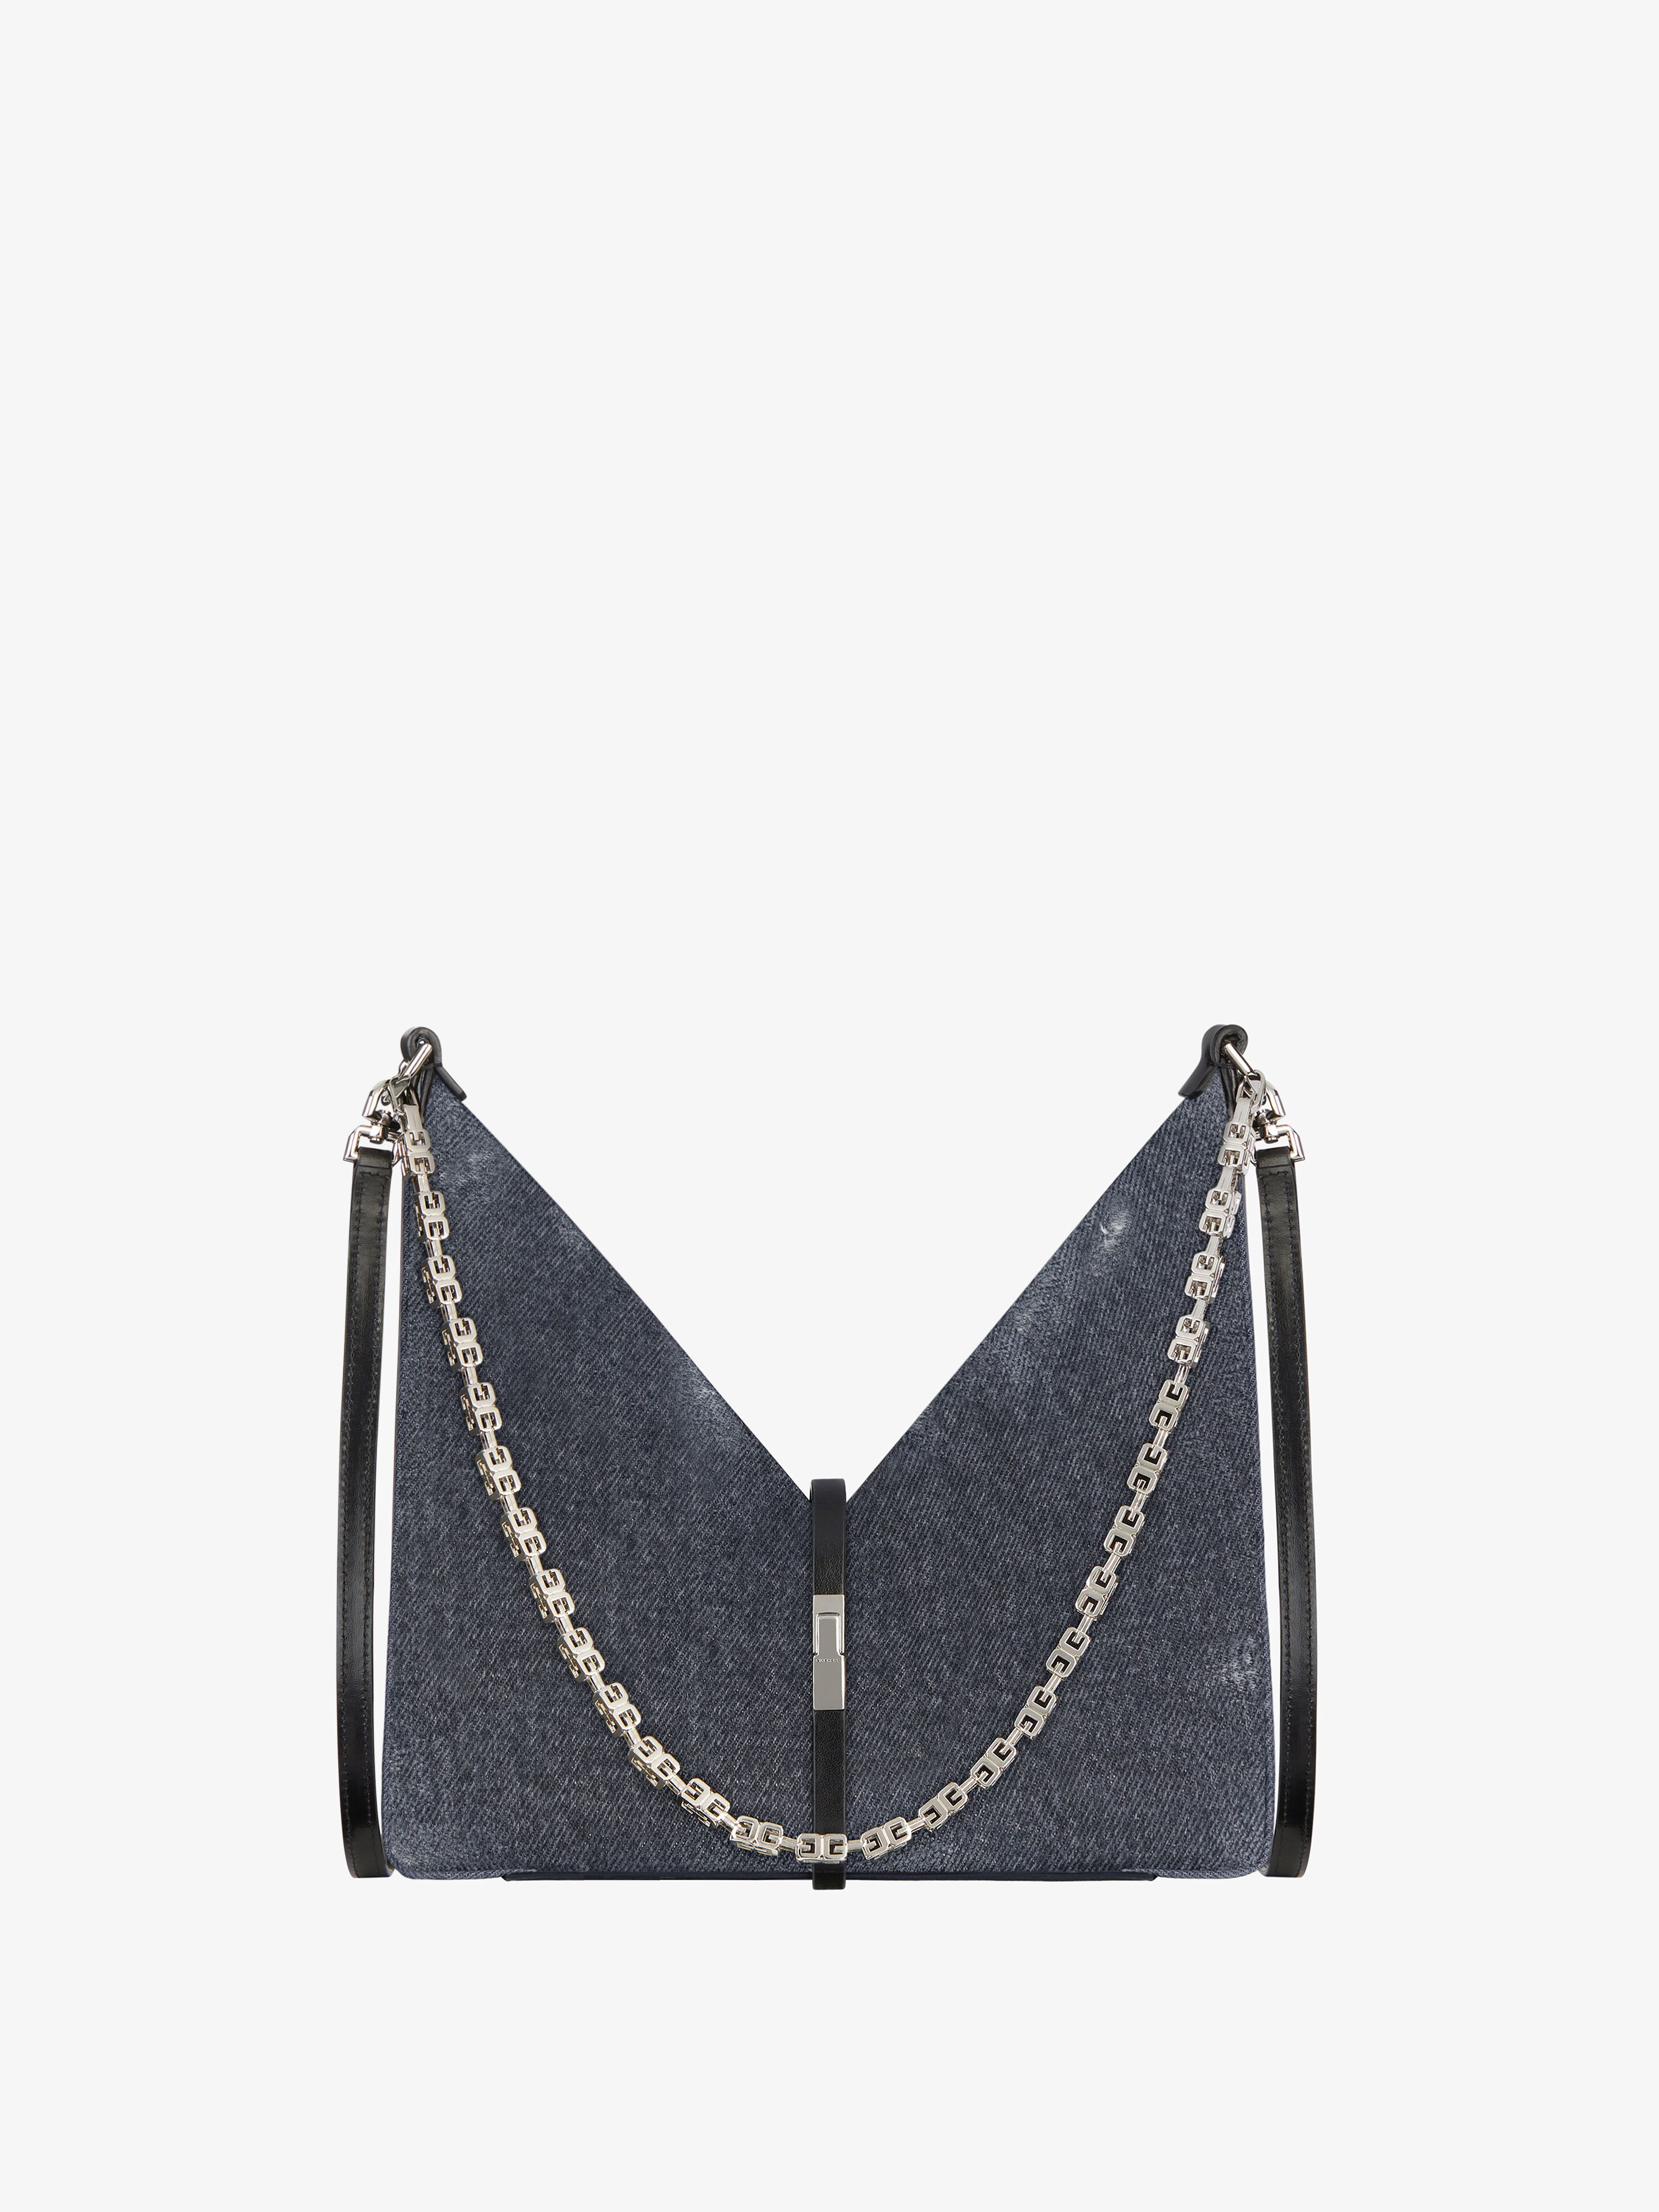 Givenchy Small Cut Out Bag In Washed Denim With Chain In Metallic